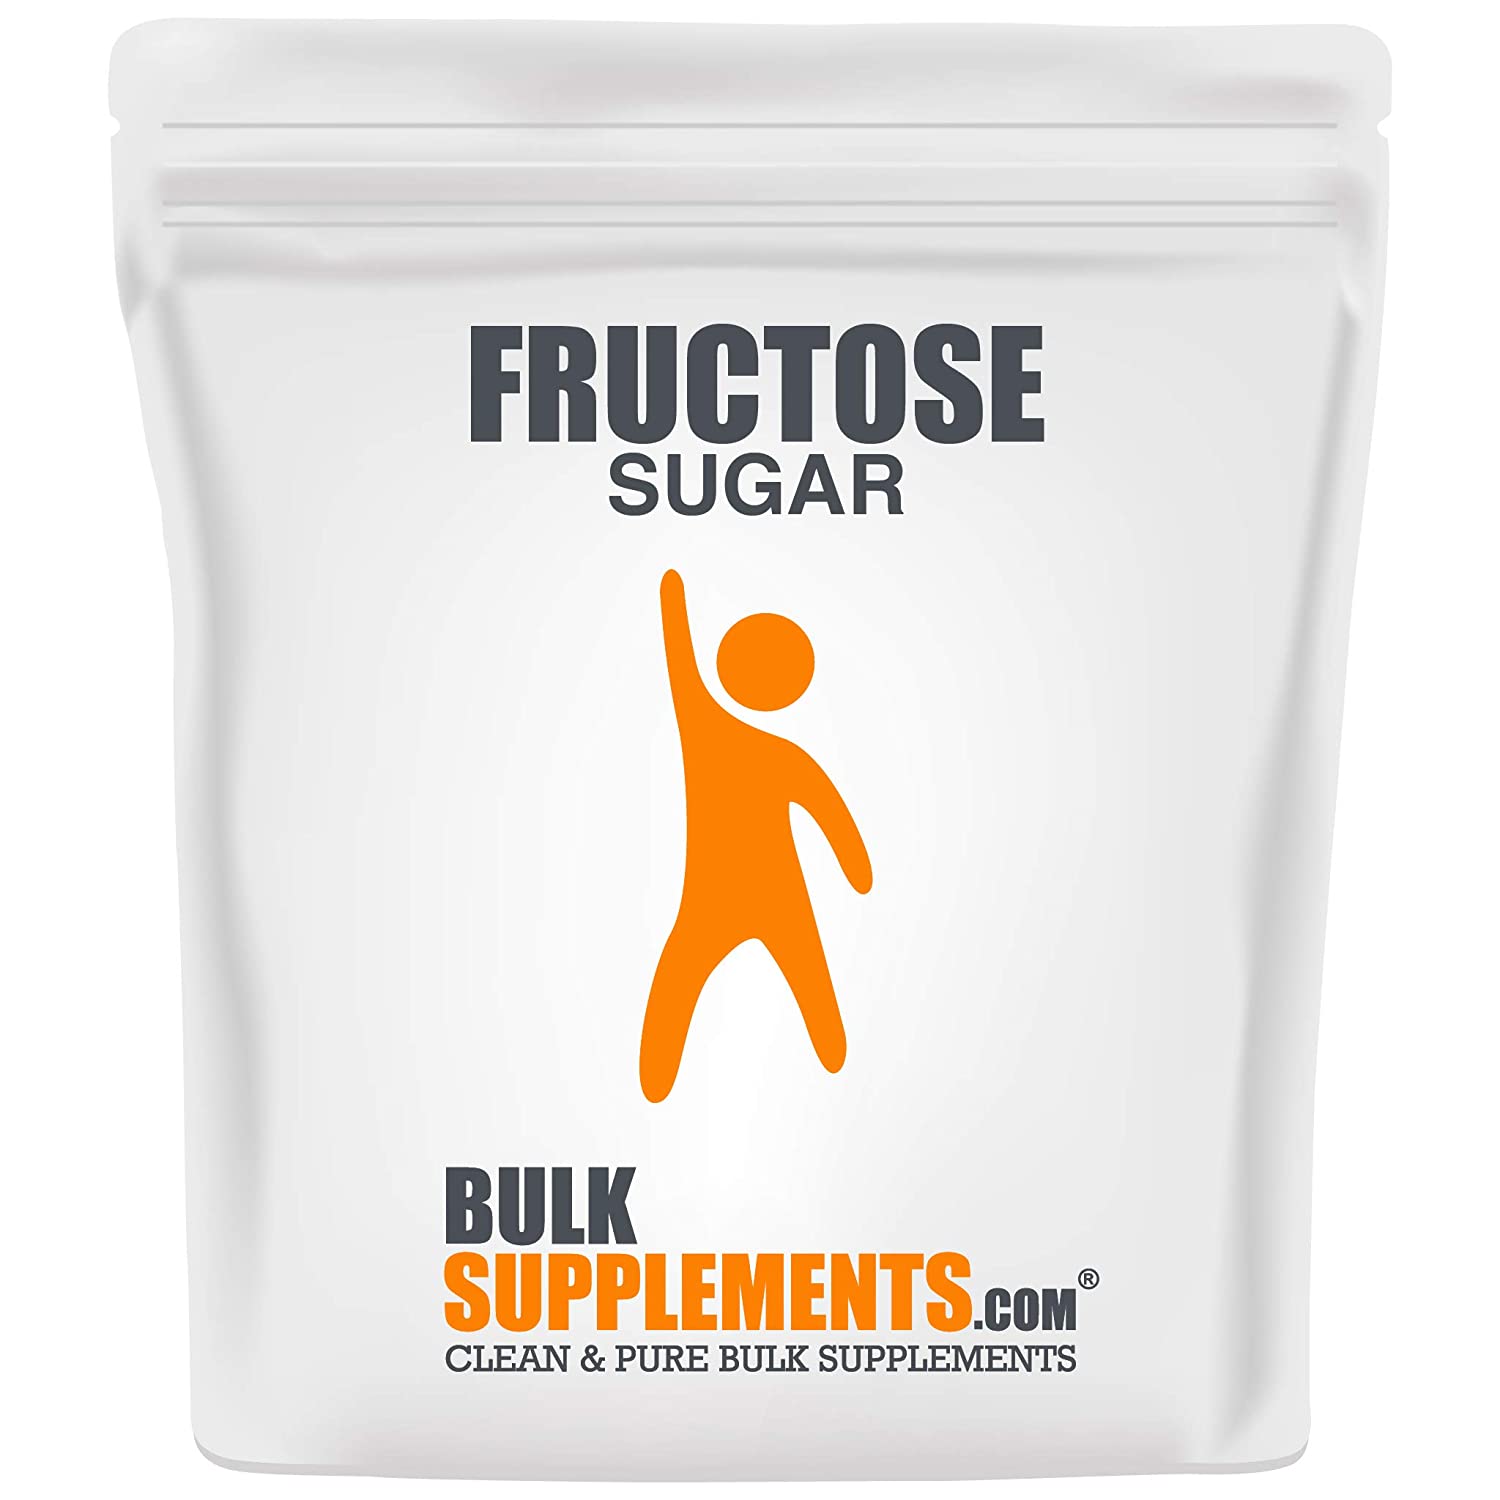 Fructose for alternative